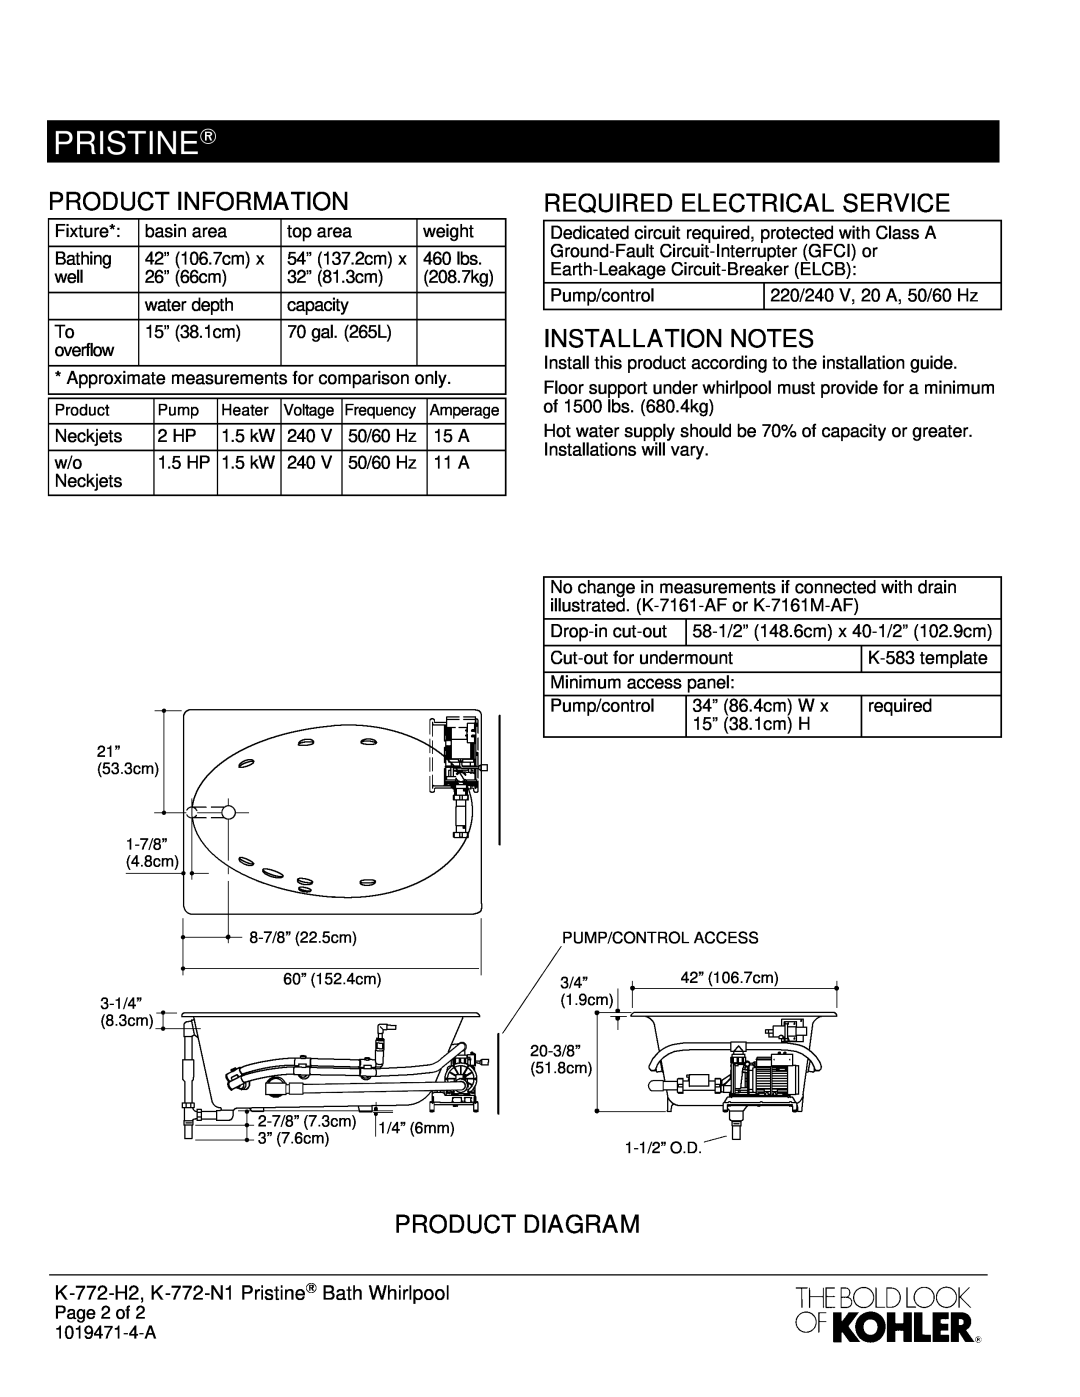 Kohler K-772-H2, K-9696 Product Information, Required Electrical Service, Installation Notes, Product Diagram, Pristine 